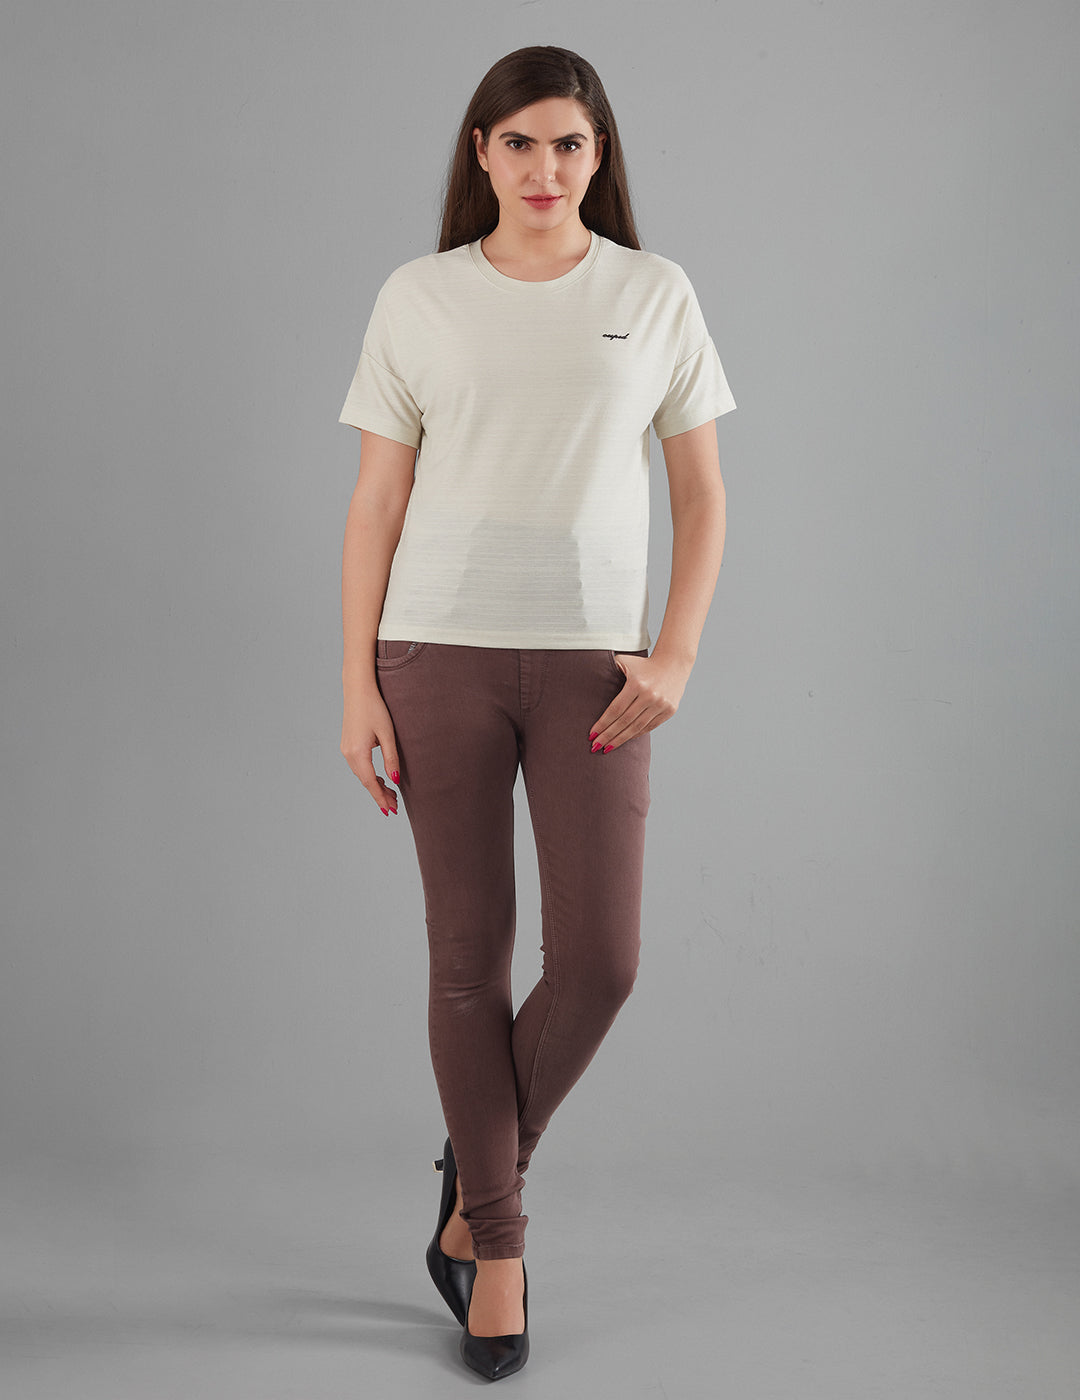 Stylish Plain Short T-Shirts for women In Off White At Best Price